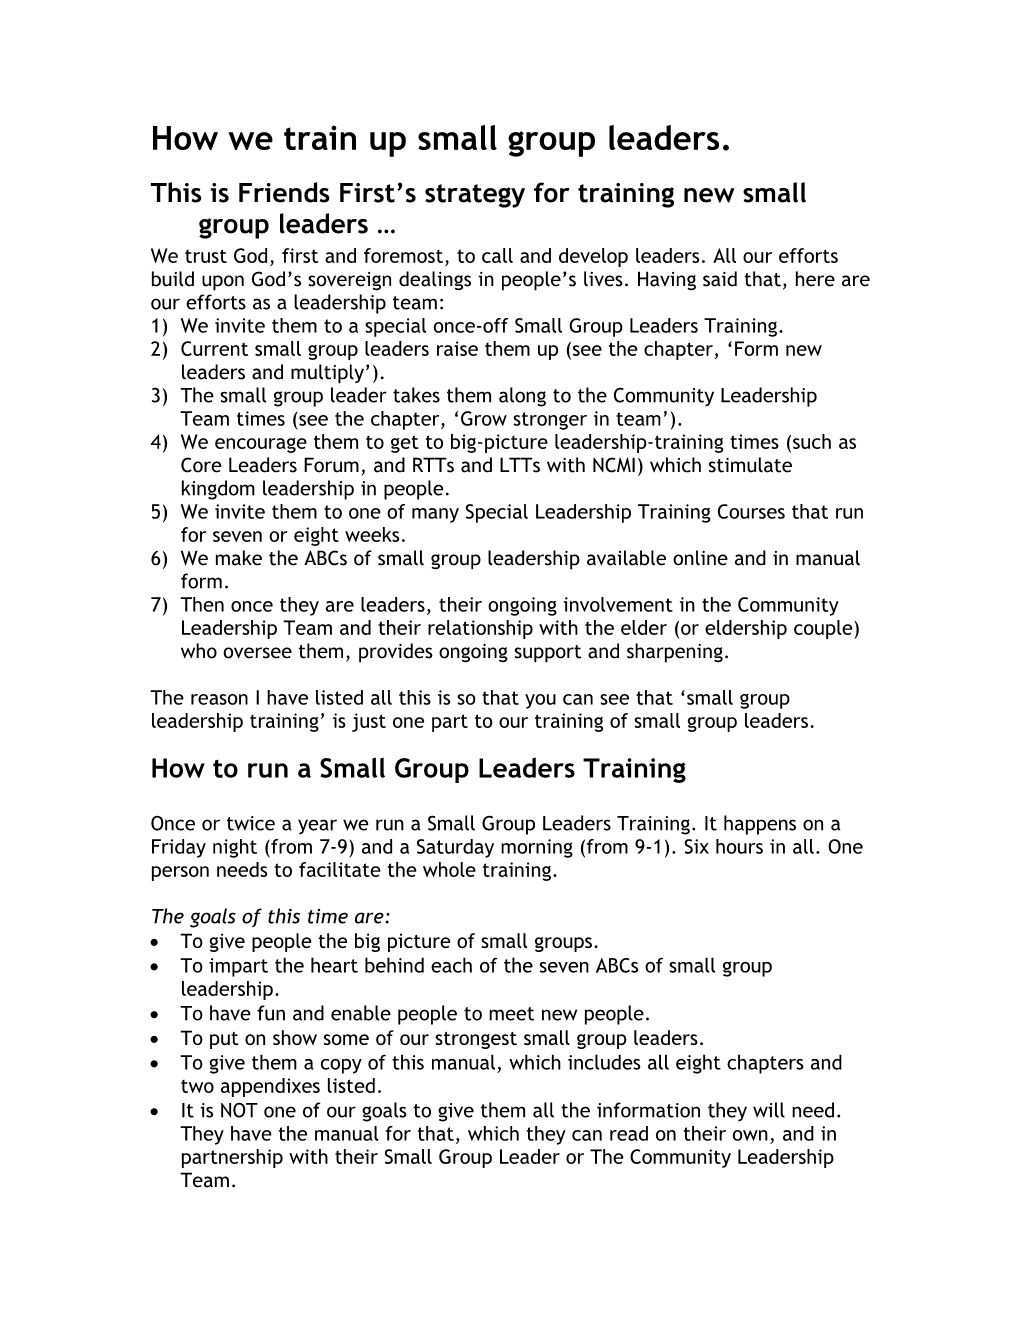 How We Train up Small Group Leaders